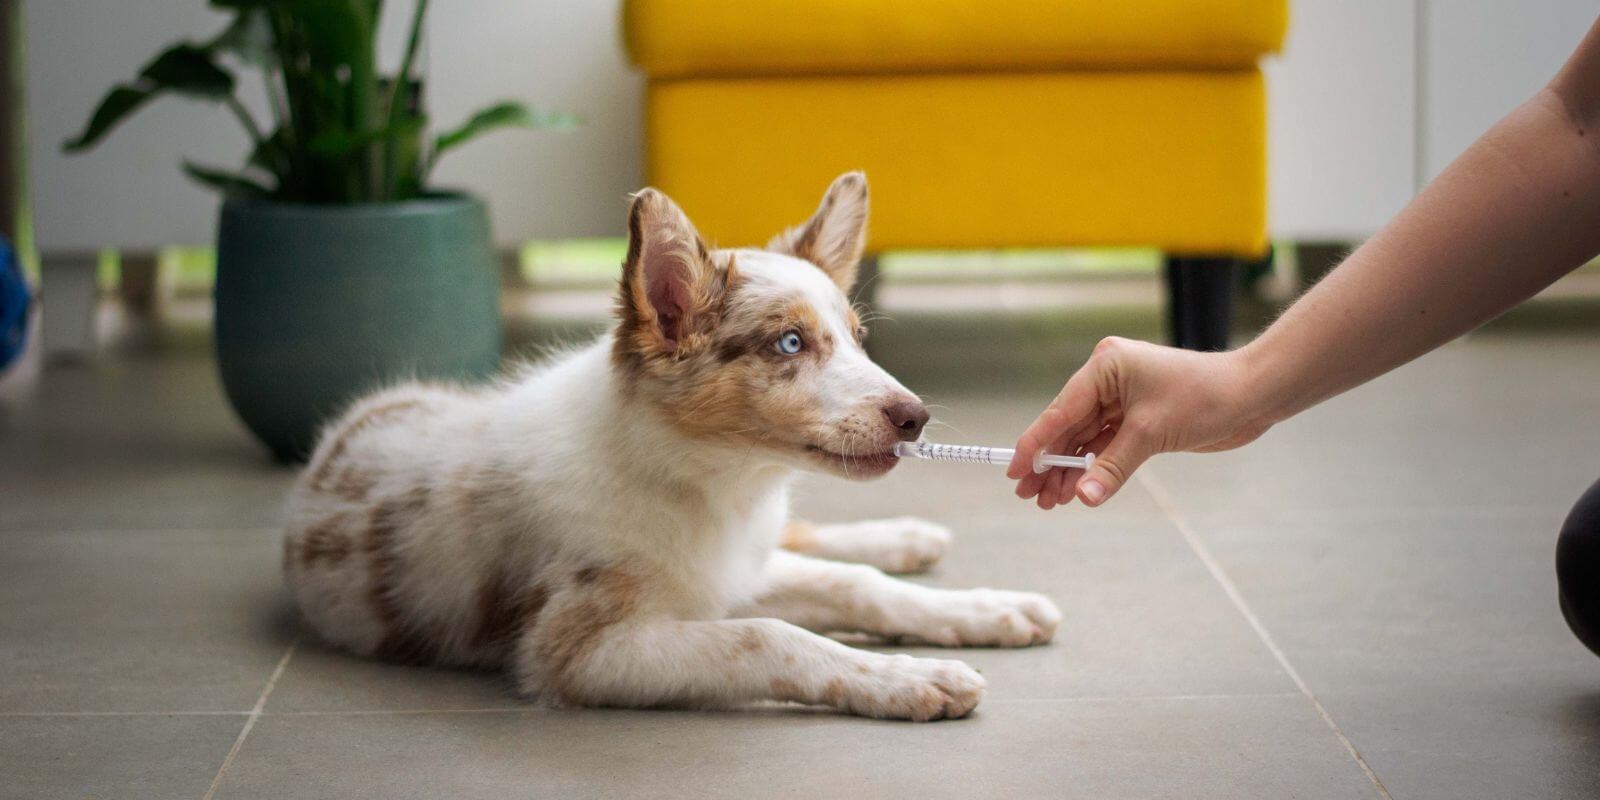 Someone administering a syringe to an Aussie puppy